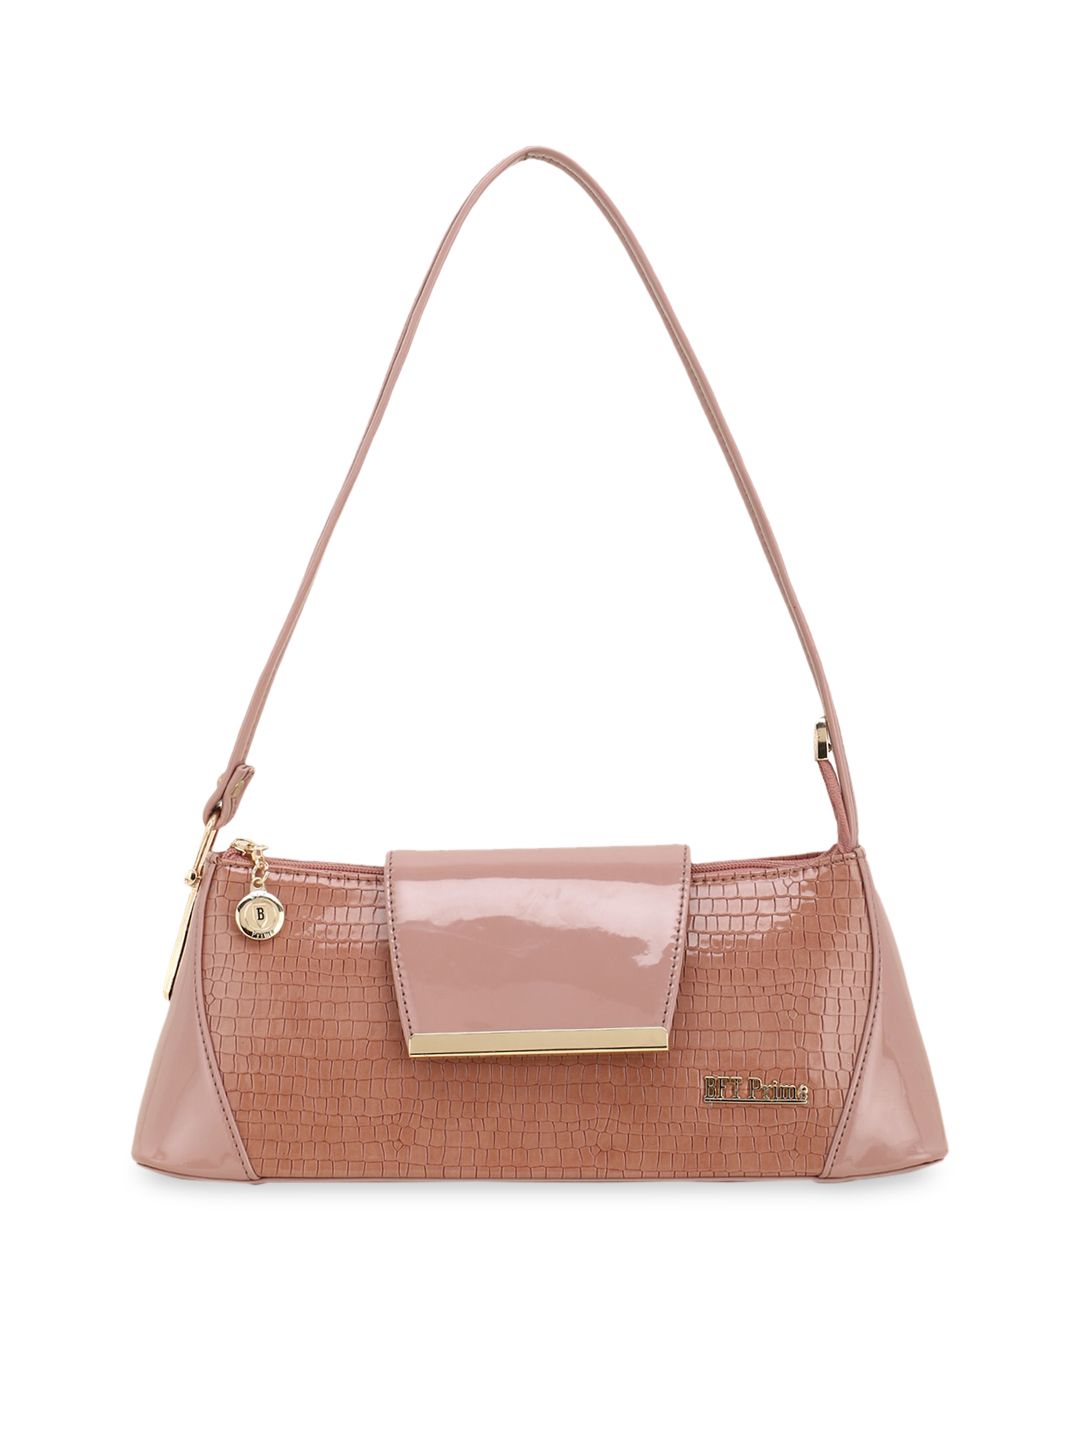 WOMEN MARKS Tan Animal Textured PU Structured Sling Bag Price in India